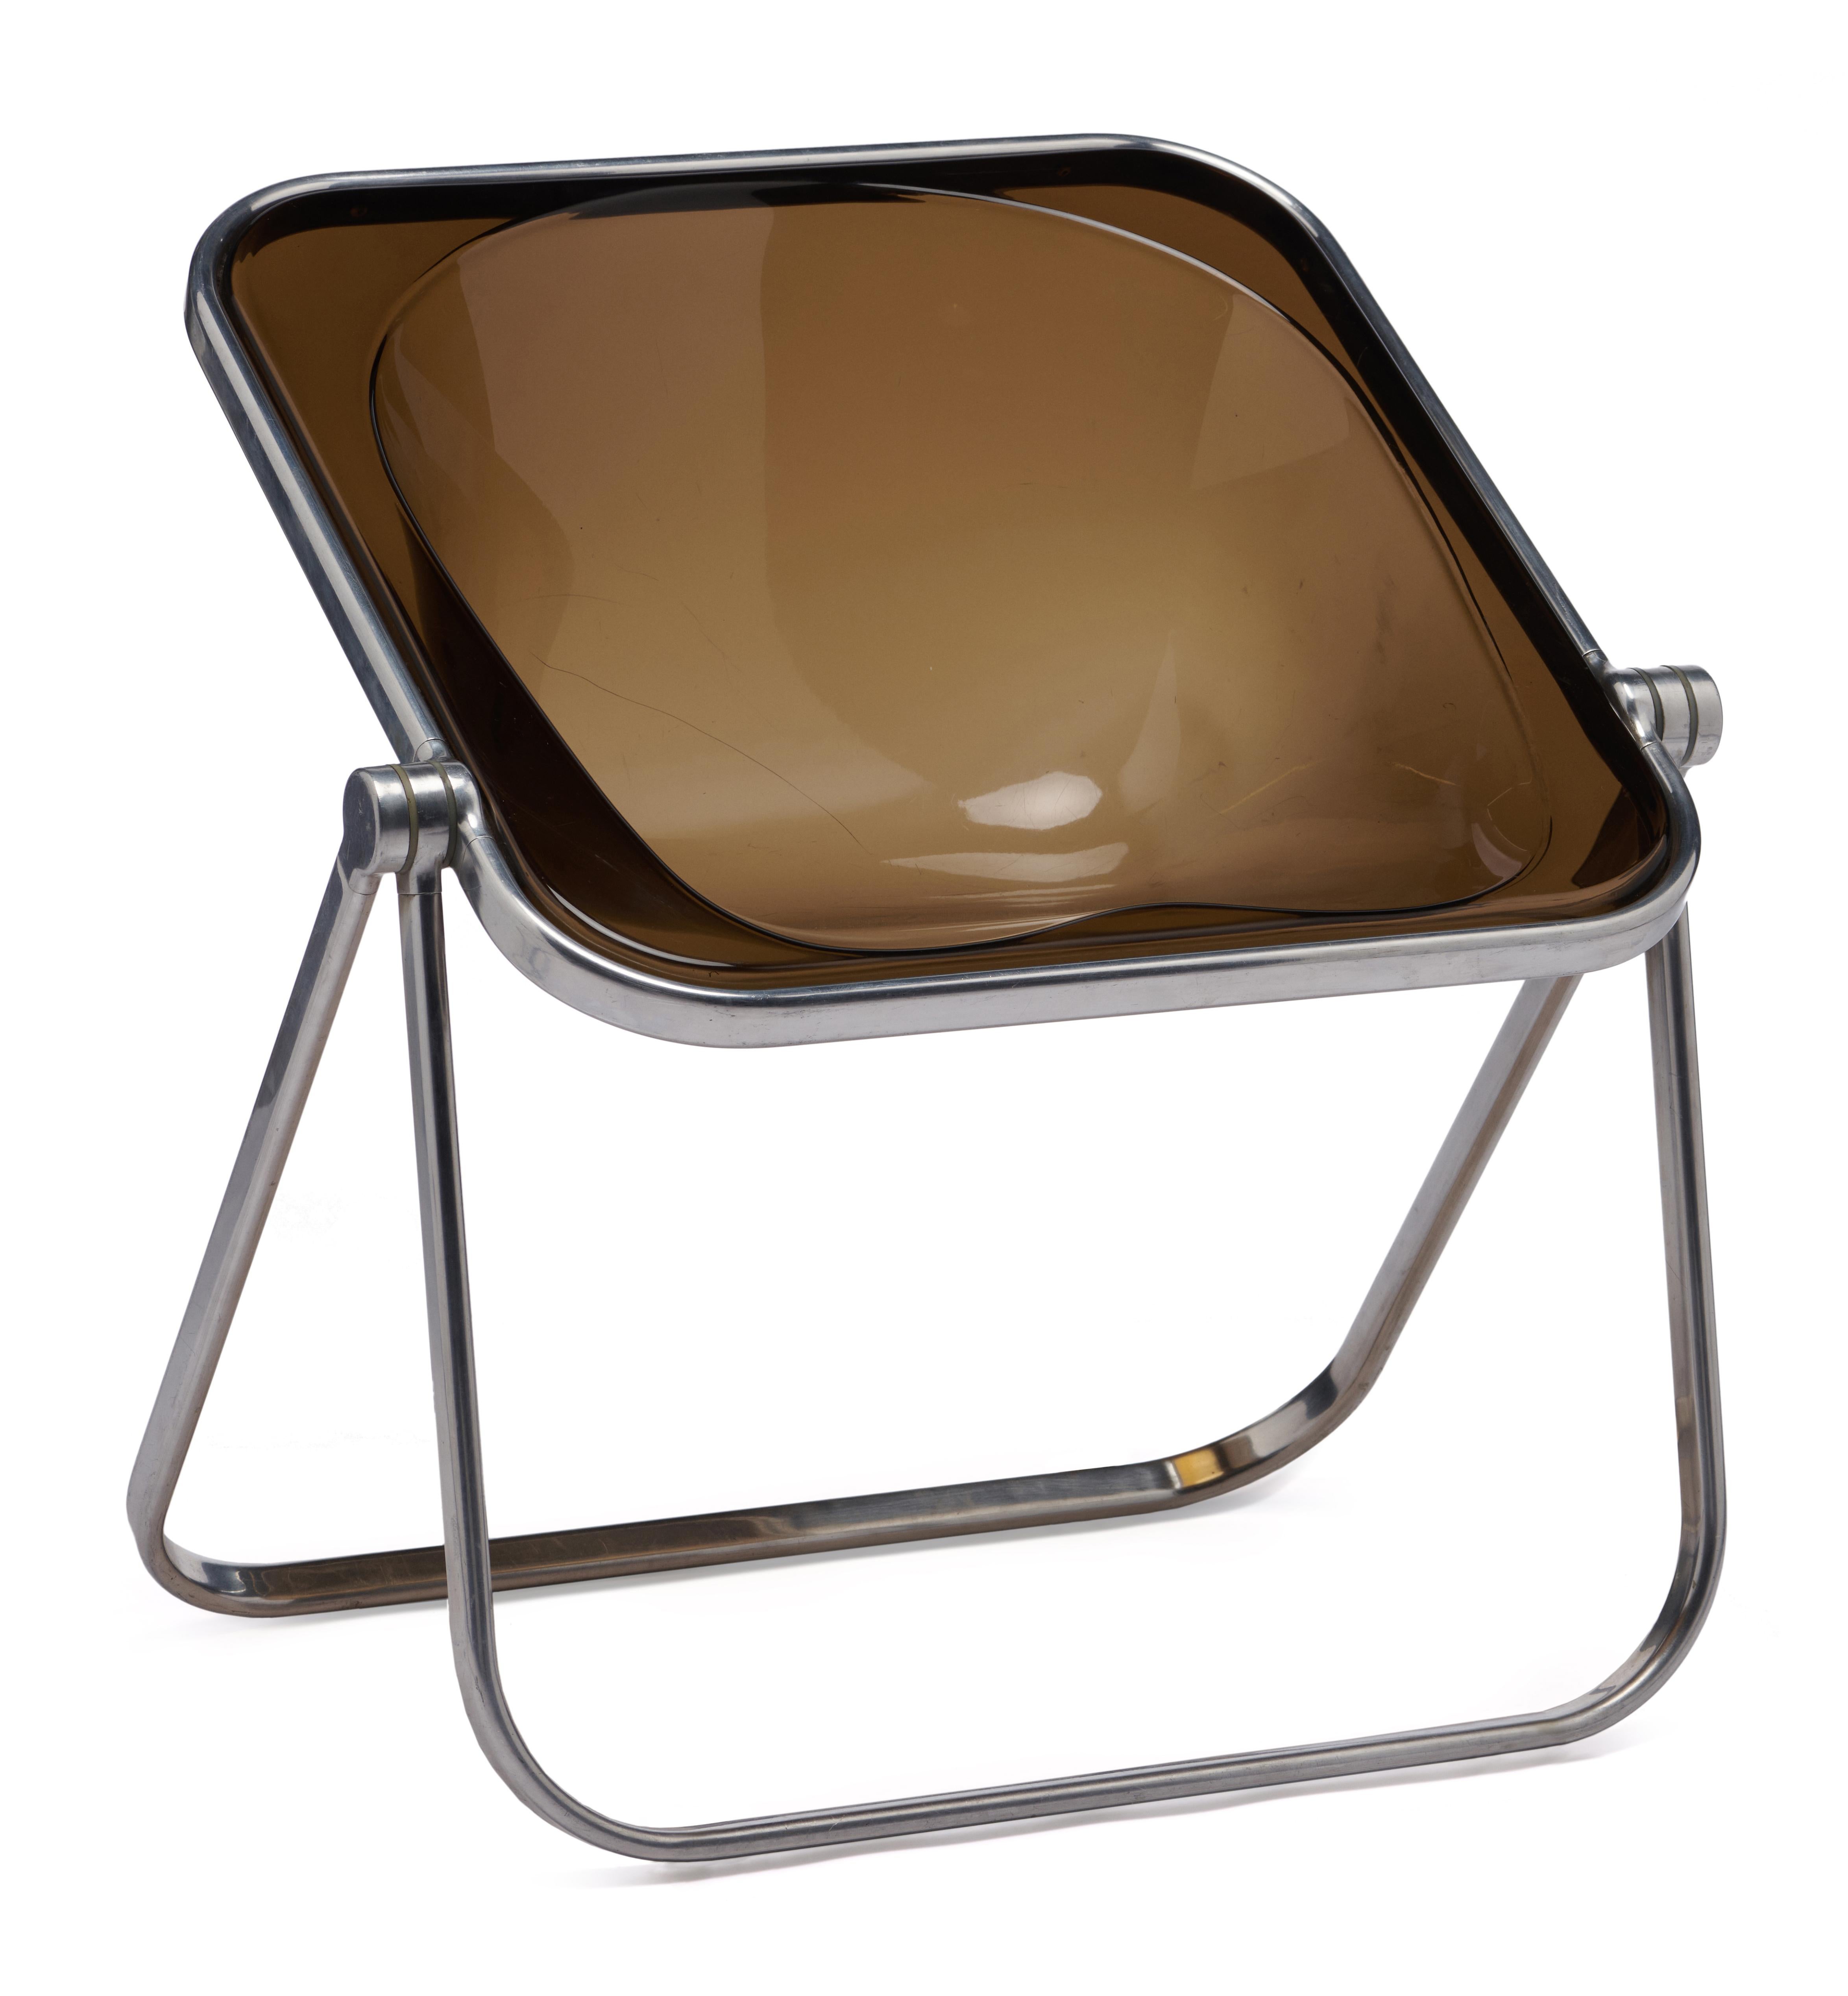 Designed in 1970 by Giancarlo Piretti, Plona is a folding and stackable armchair. The solid tubular structure is in polished stainless aluminum alloy, with hinges in die-cast light alloy. 

Good vintage condition. Some scratches and scuffs